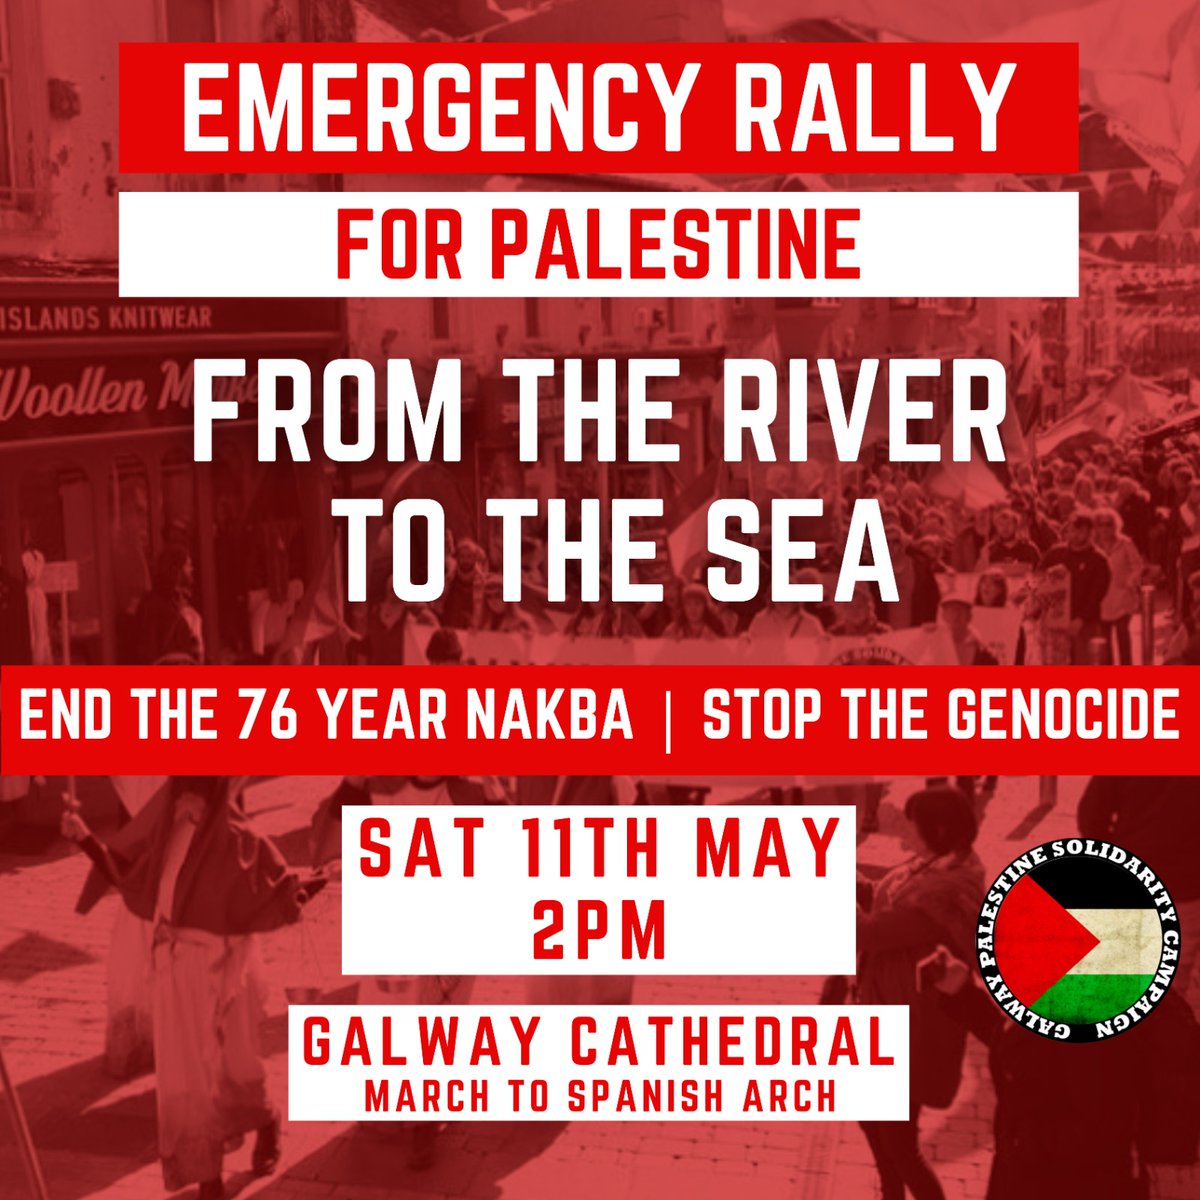 An 'emergency rally' for #Palestine takes place in #Galway city centre on Saturday (2pm). Starting at Galway Cathedral. #EndIsraeliApartheid #GazaGenocide